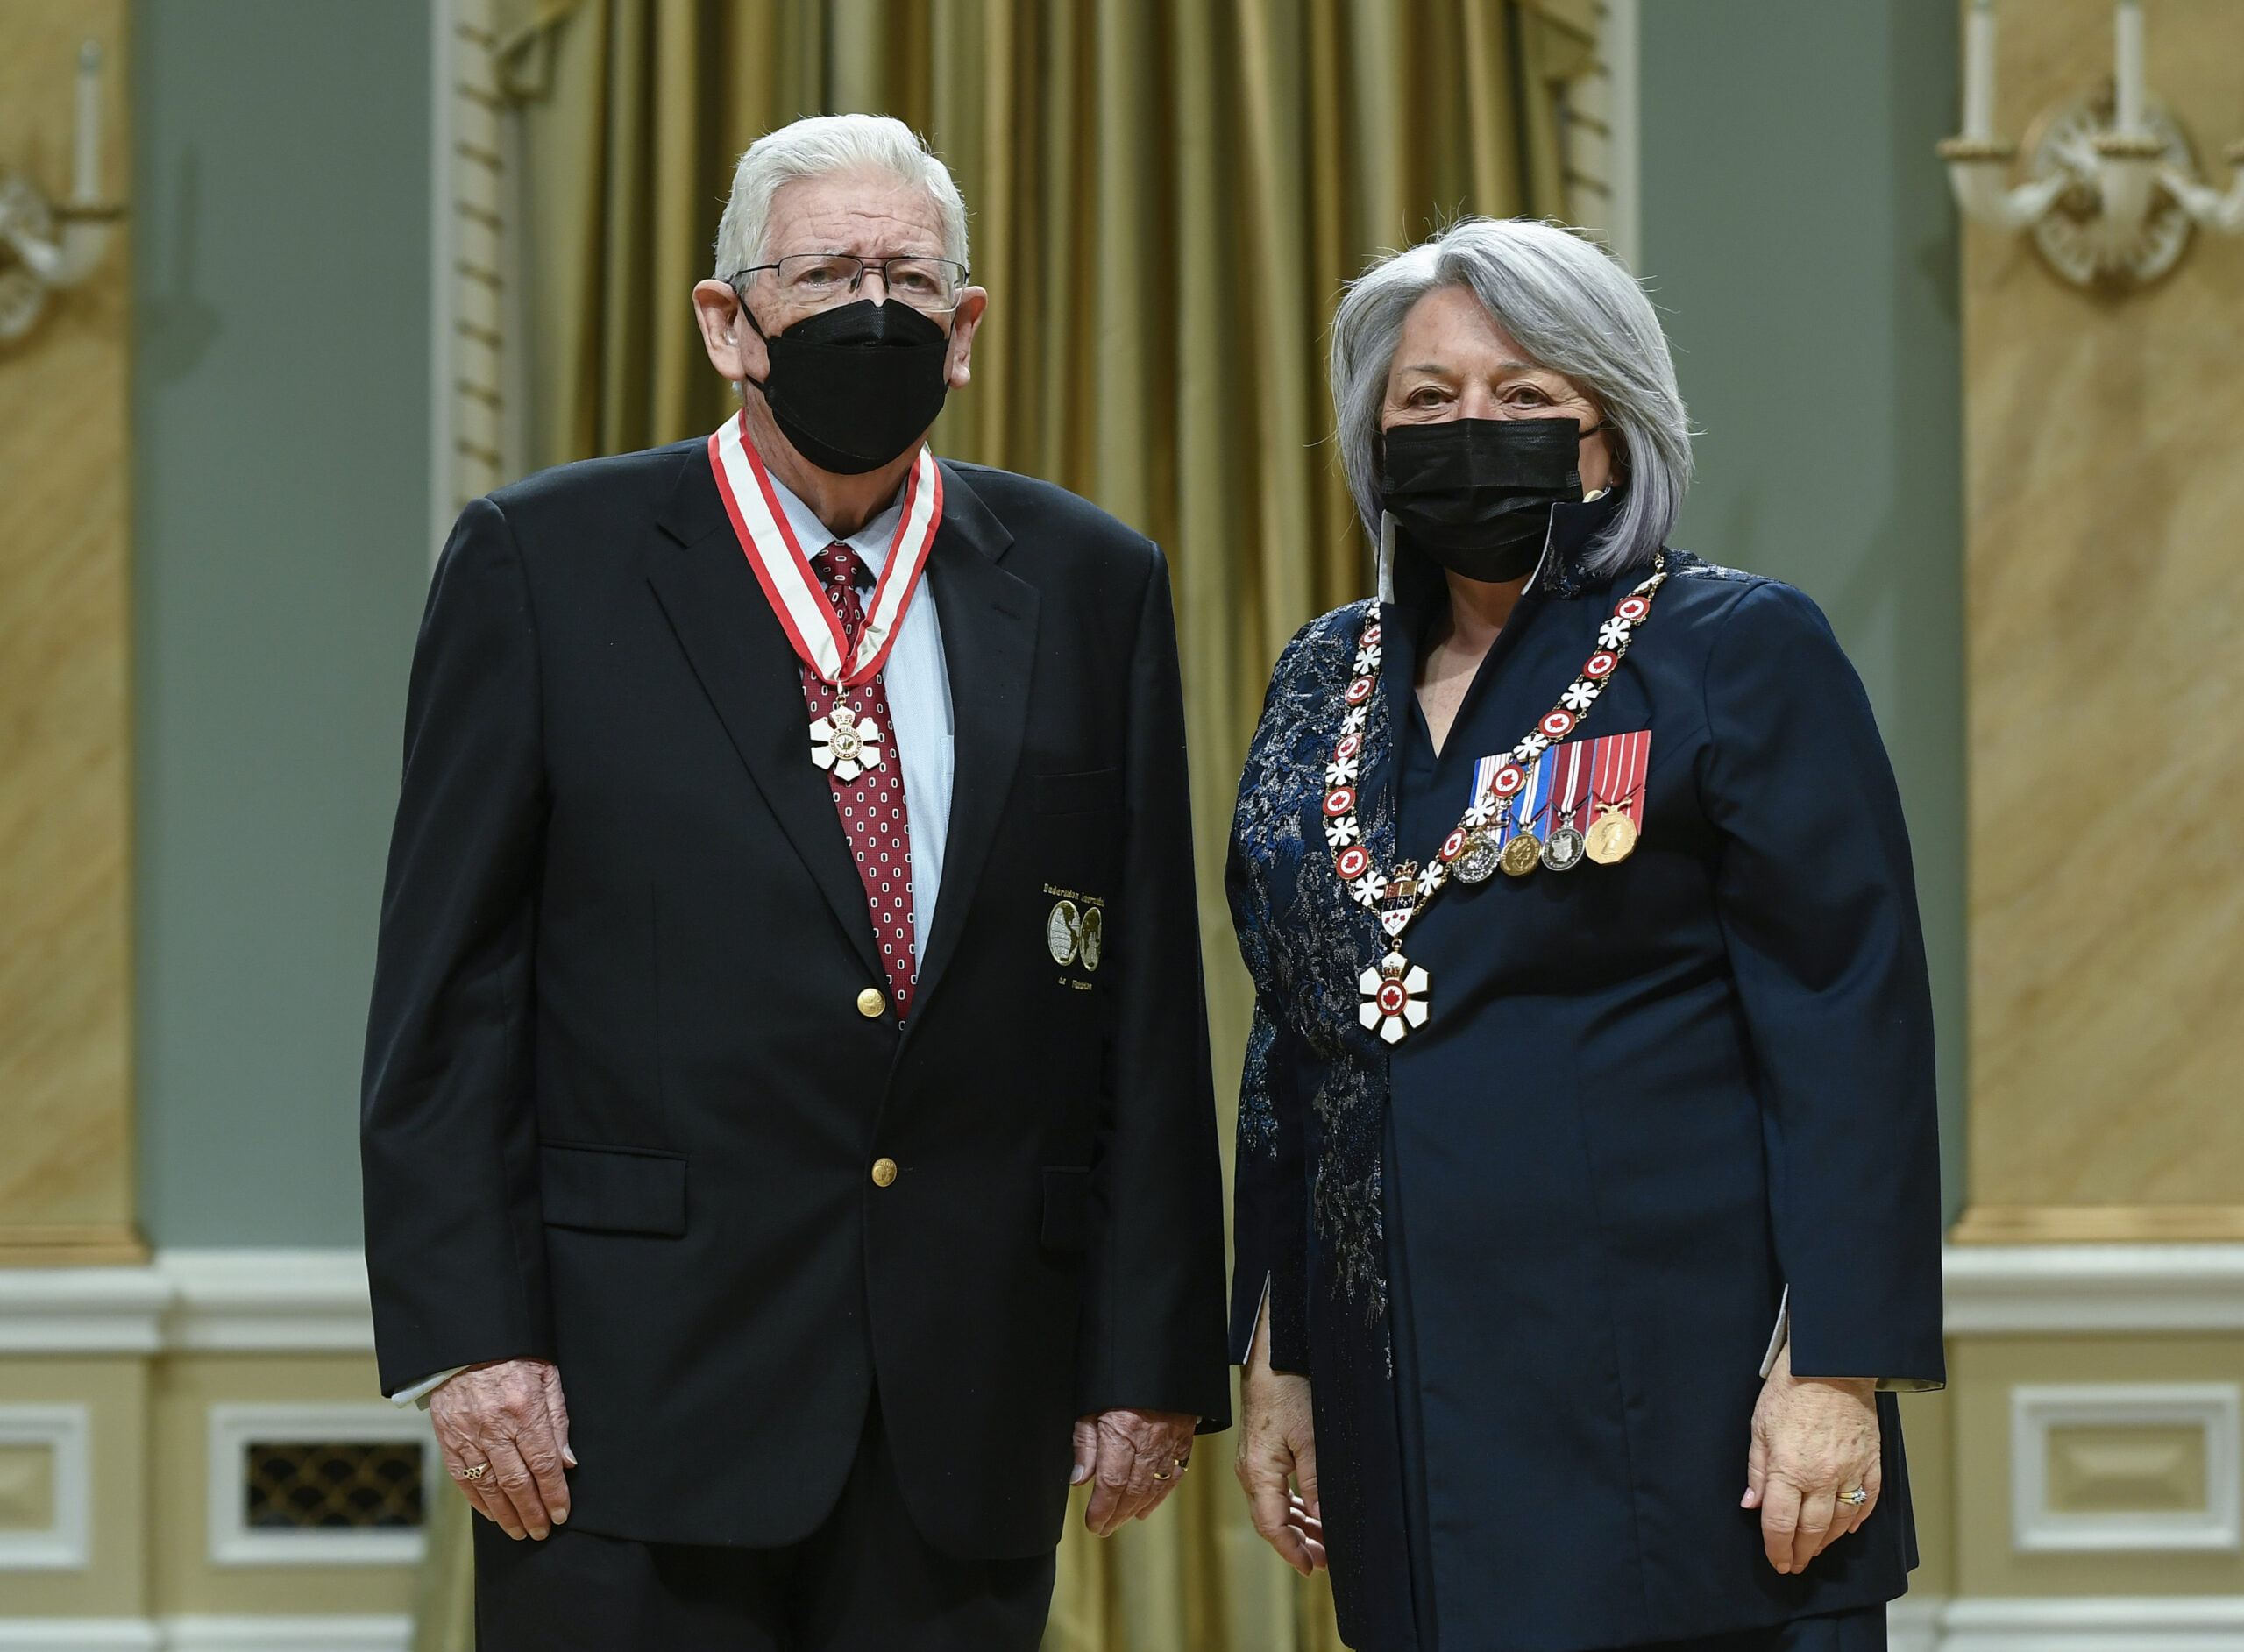 Eldon Godfrey invested as an Officer of the Order of Canada